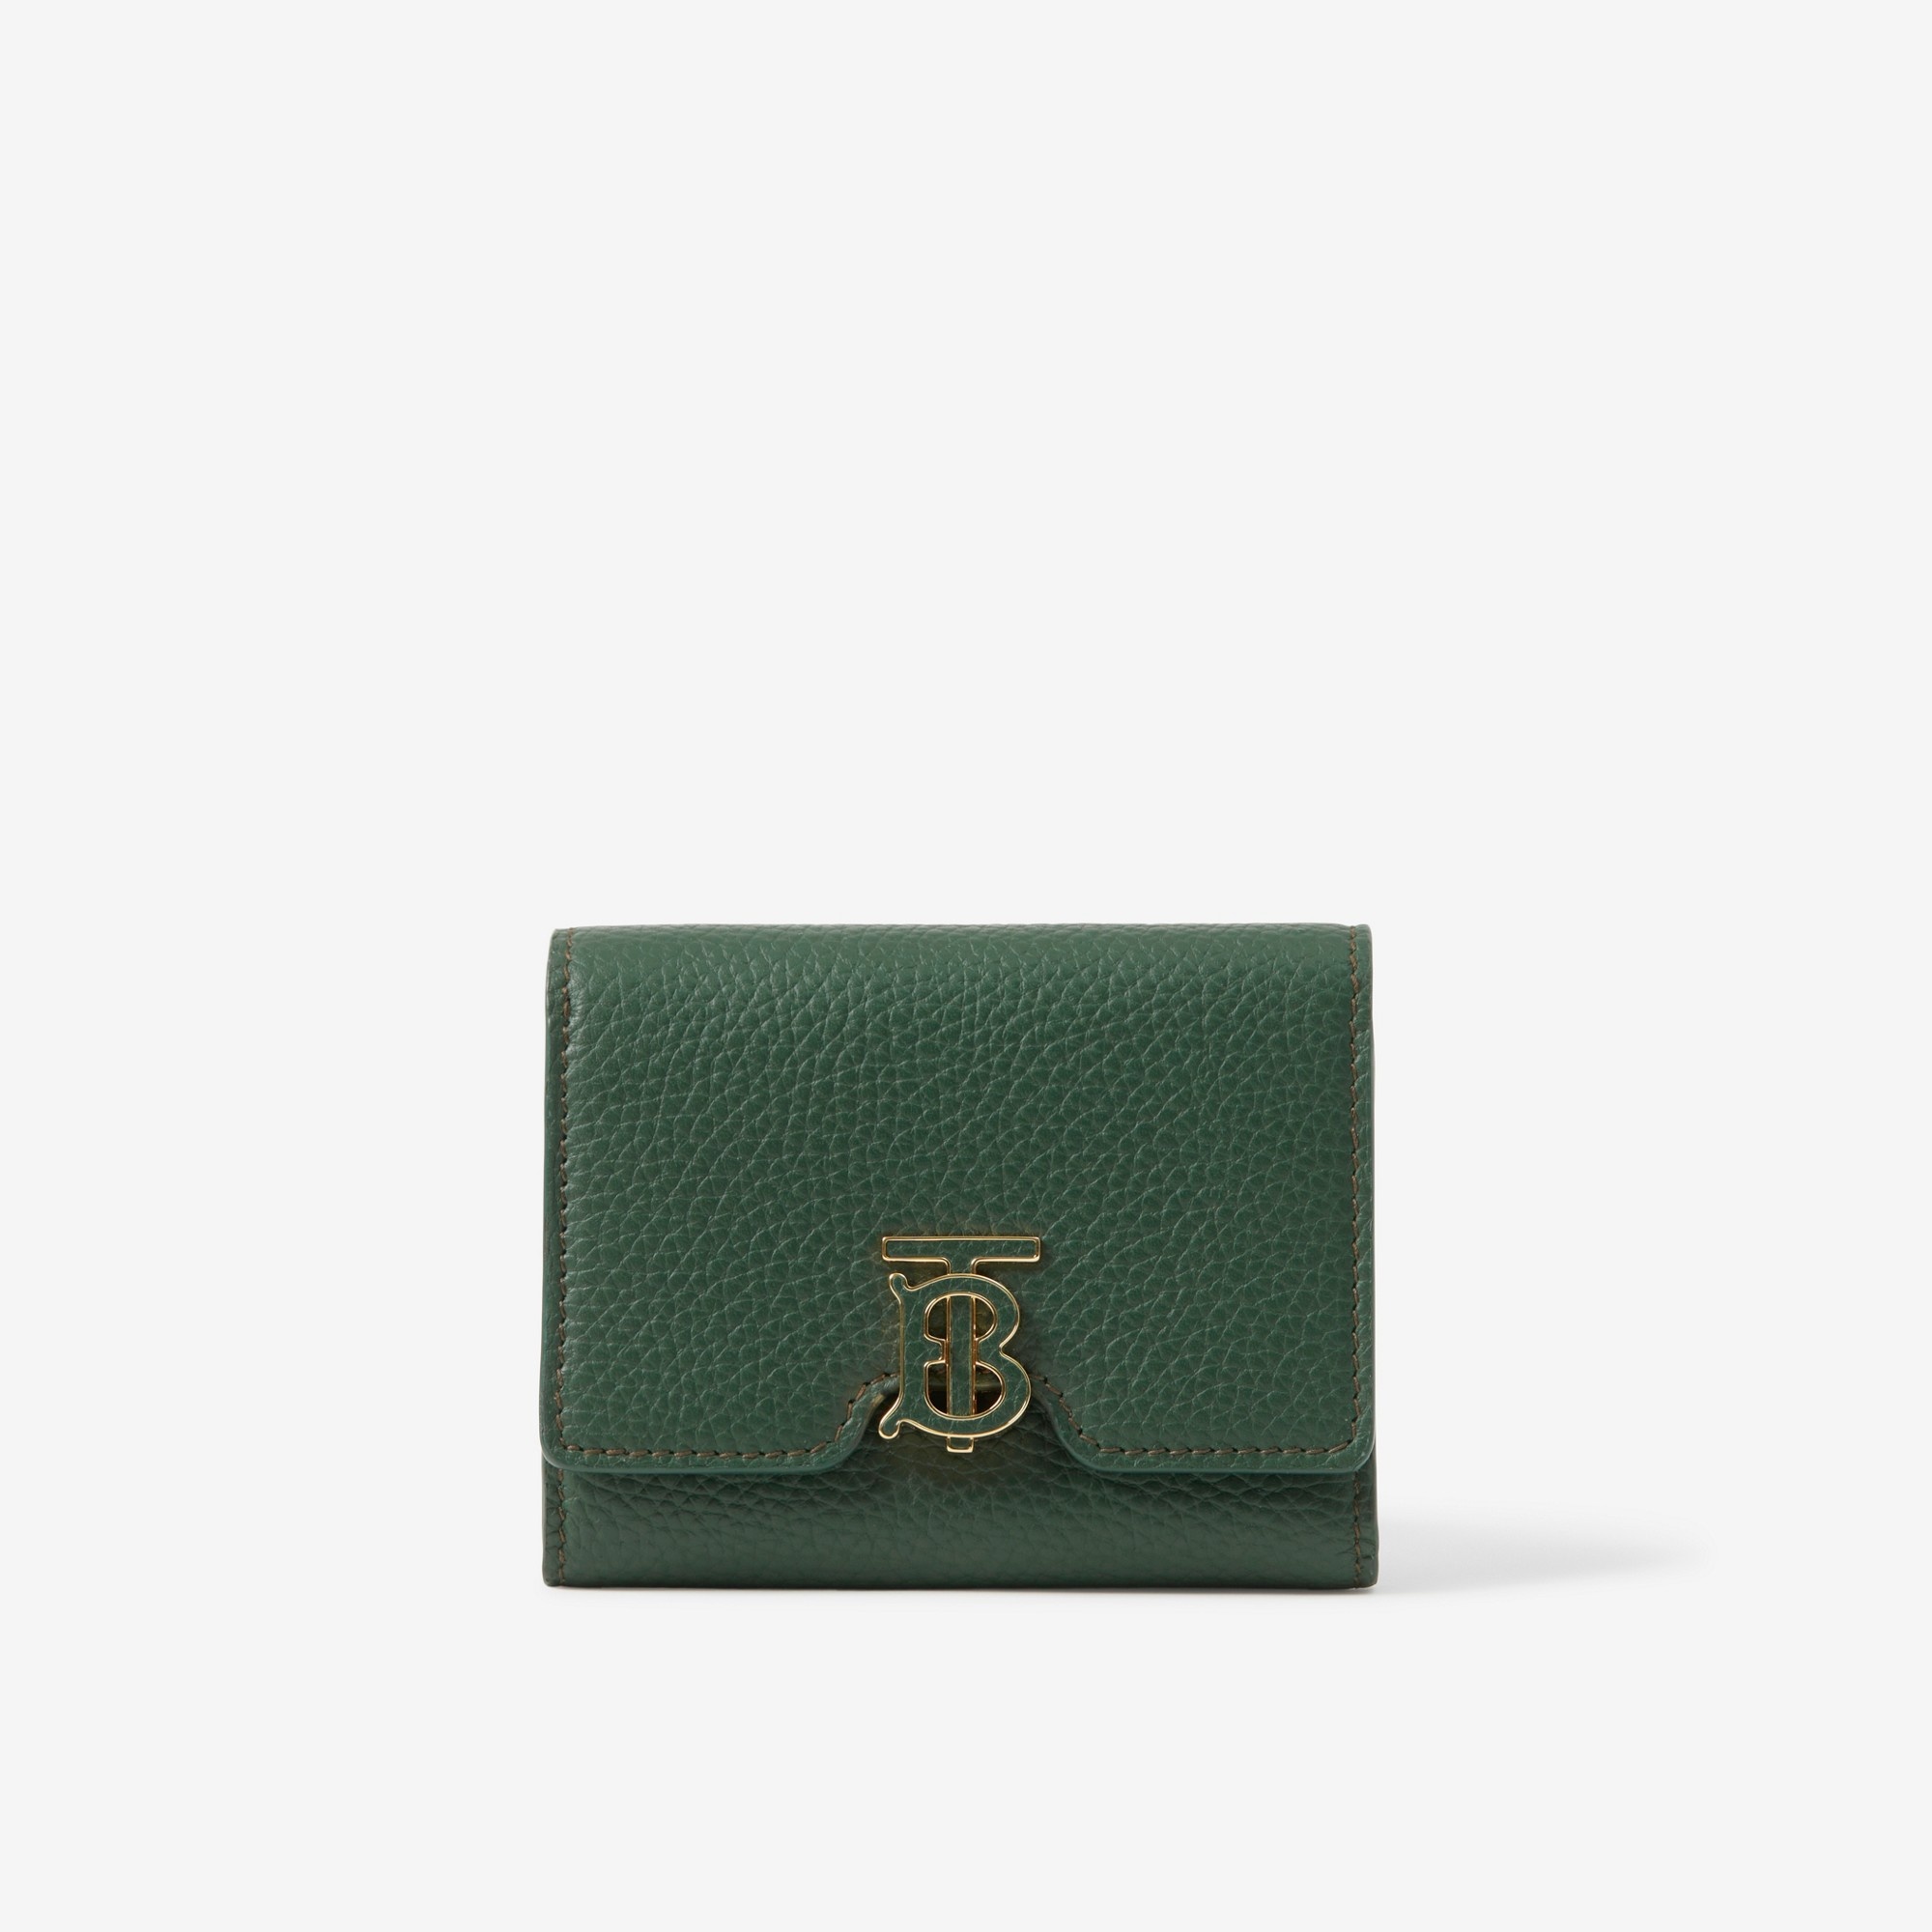 Burberry Card Holder for Women Green Leather and Great Condition